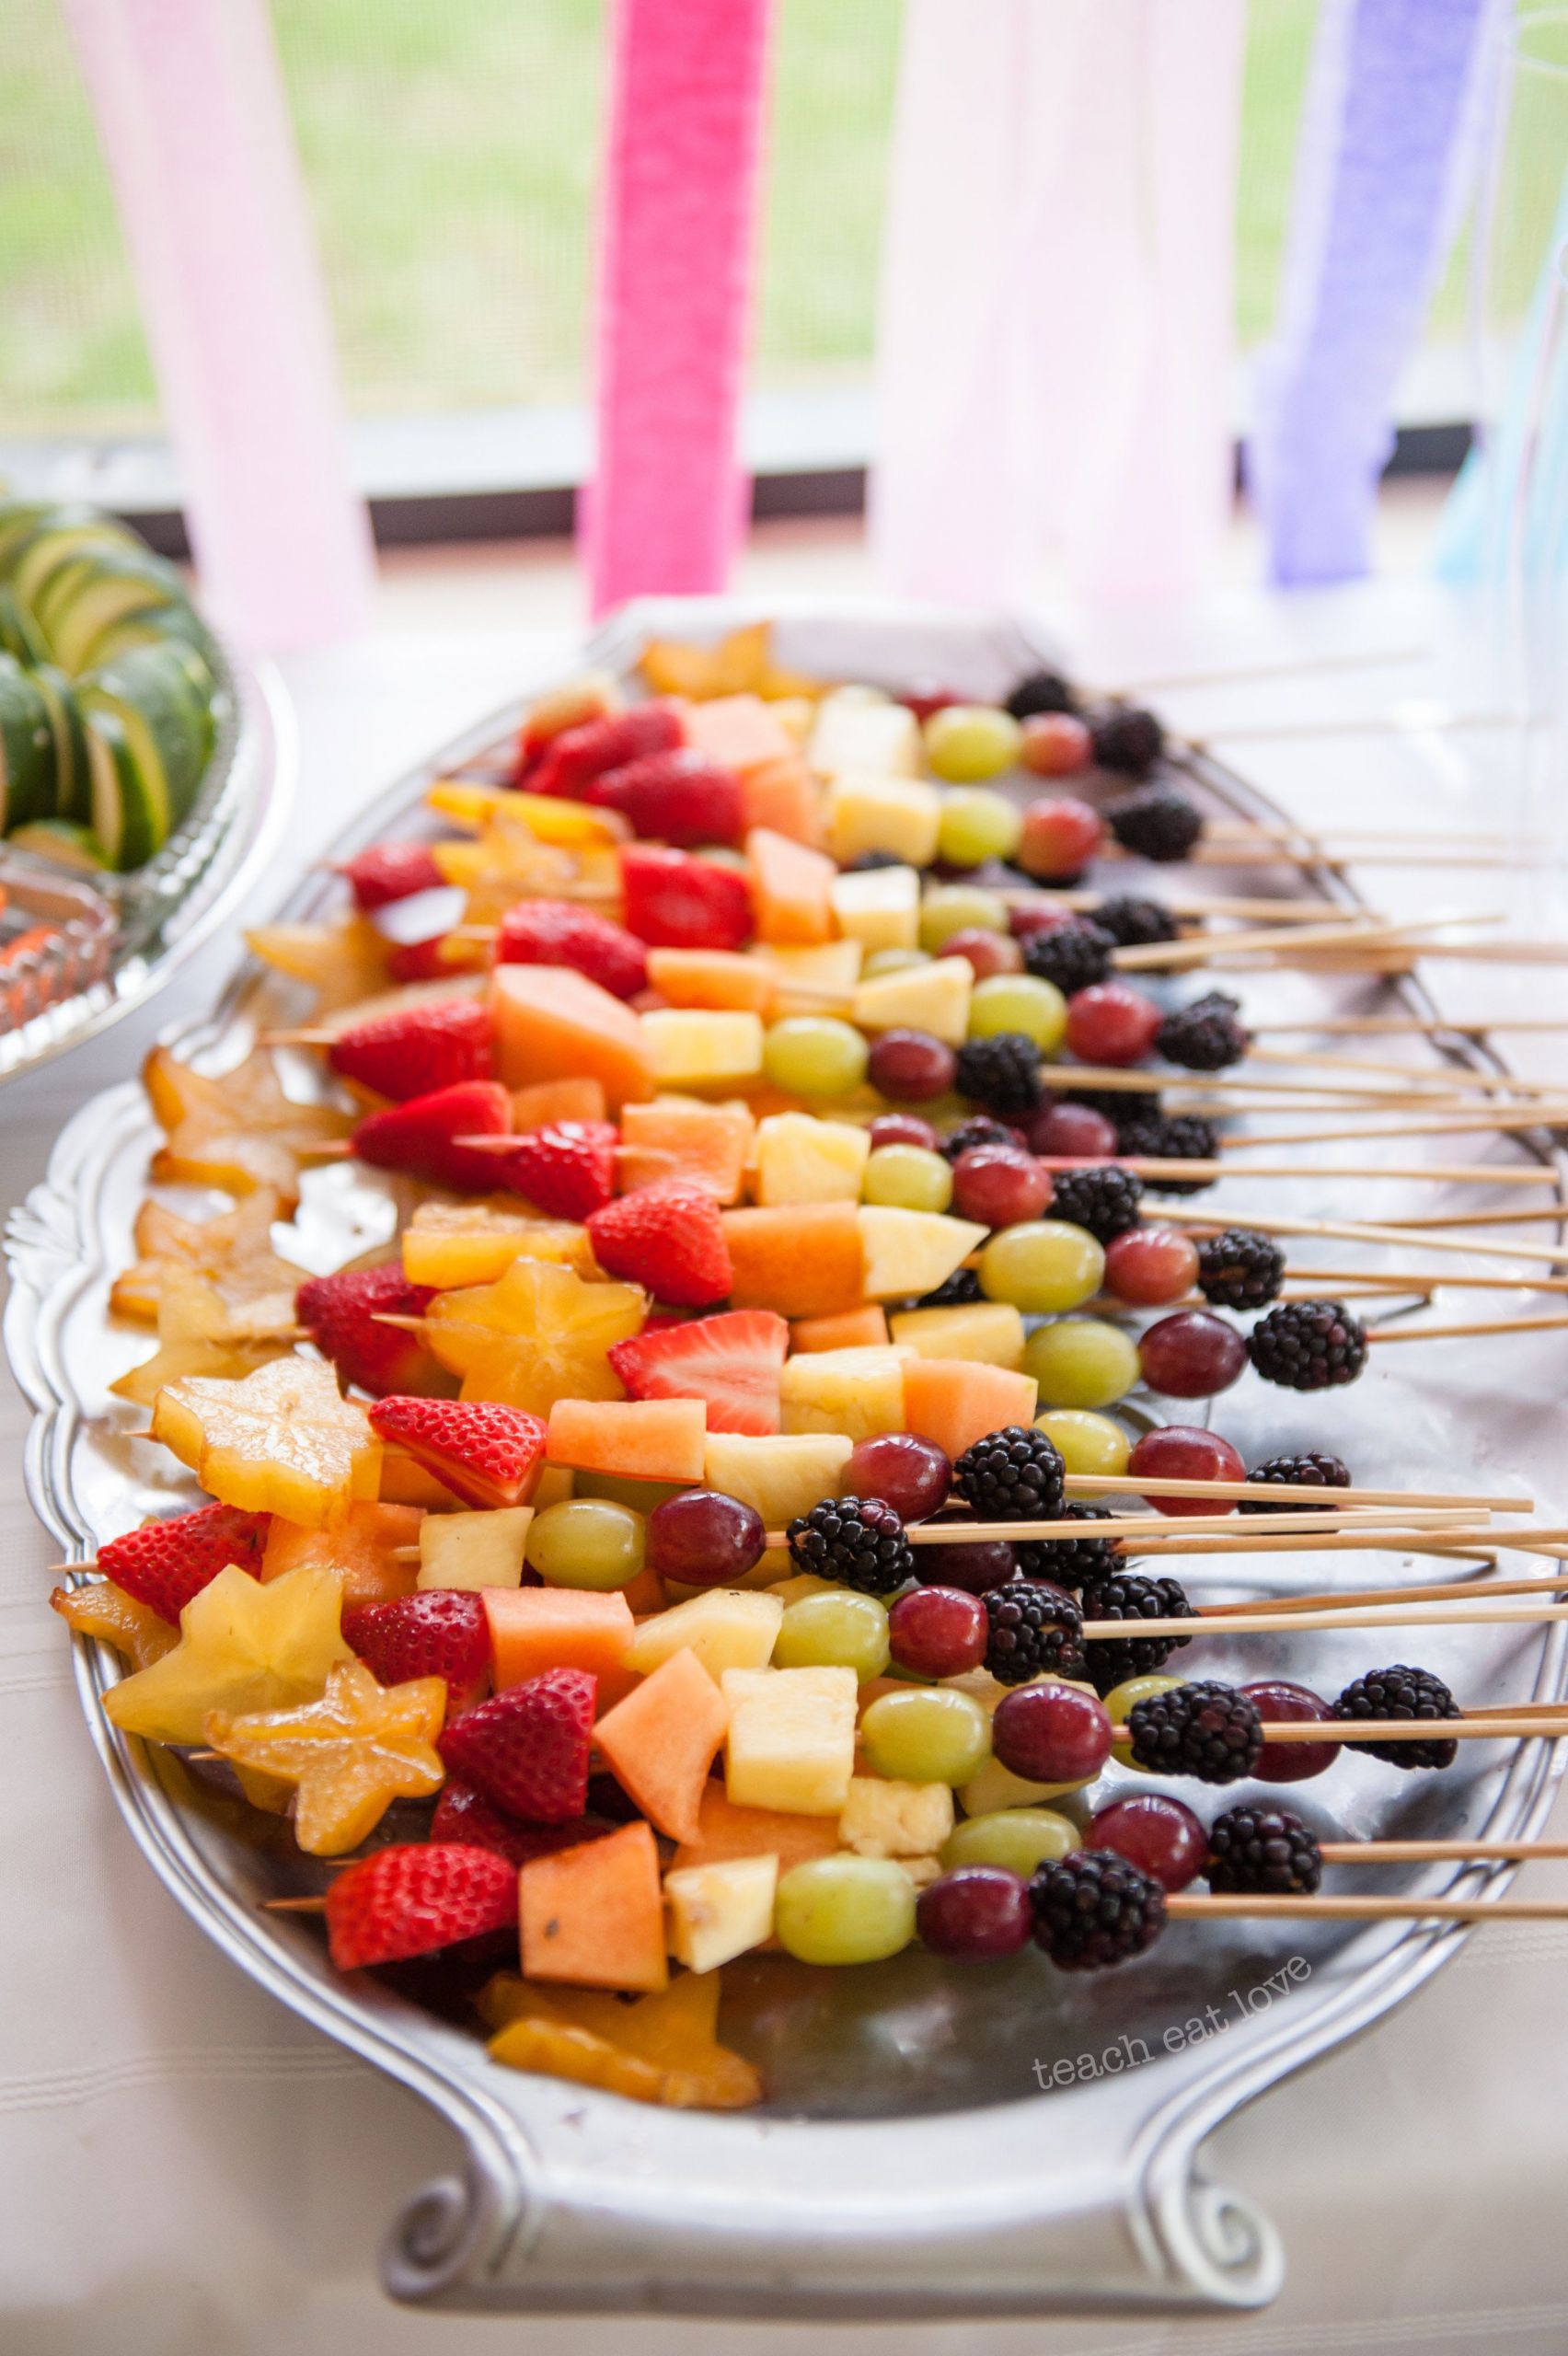 Pinterest Party Food Ideas
 The Baby’s First Birthday Recipe Round up and Fruit